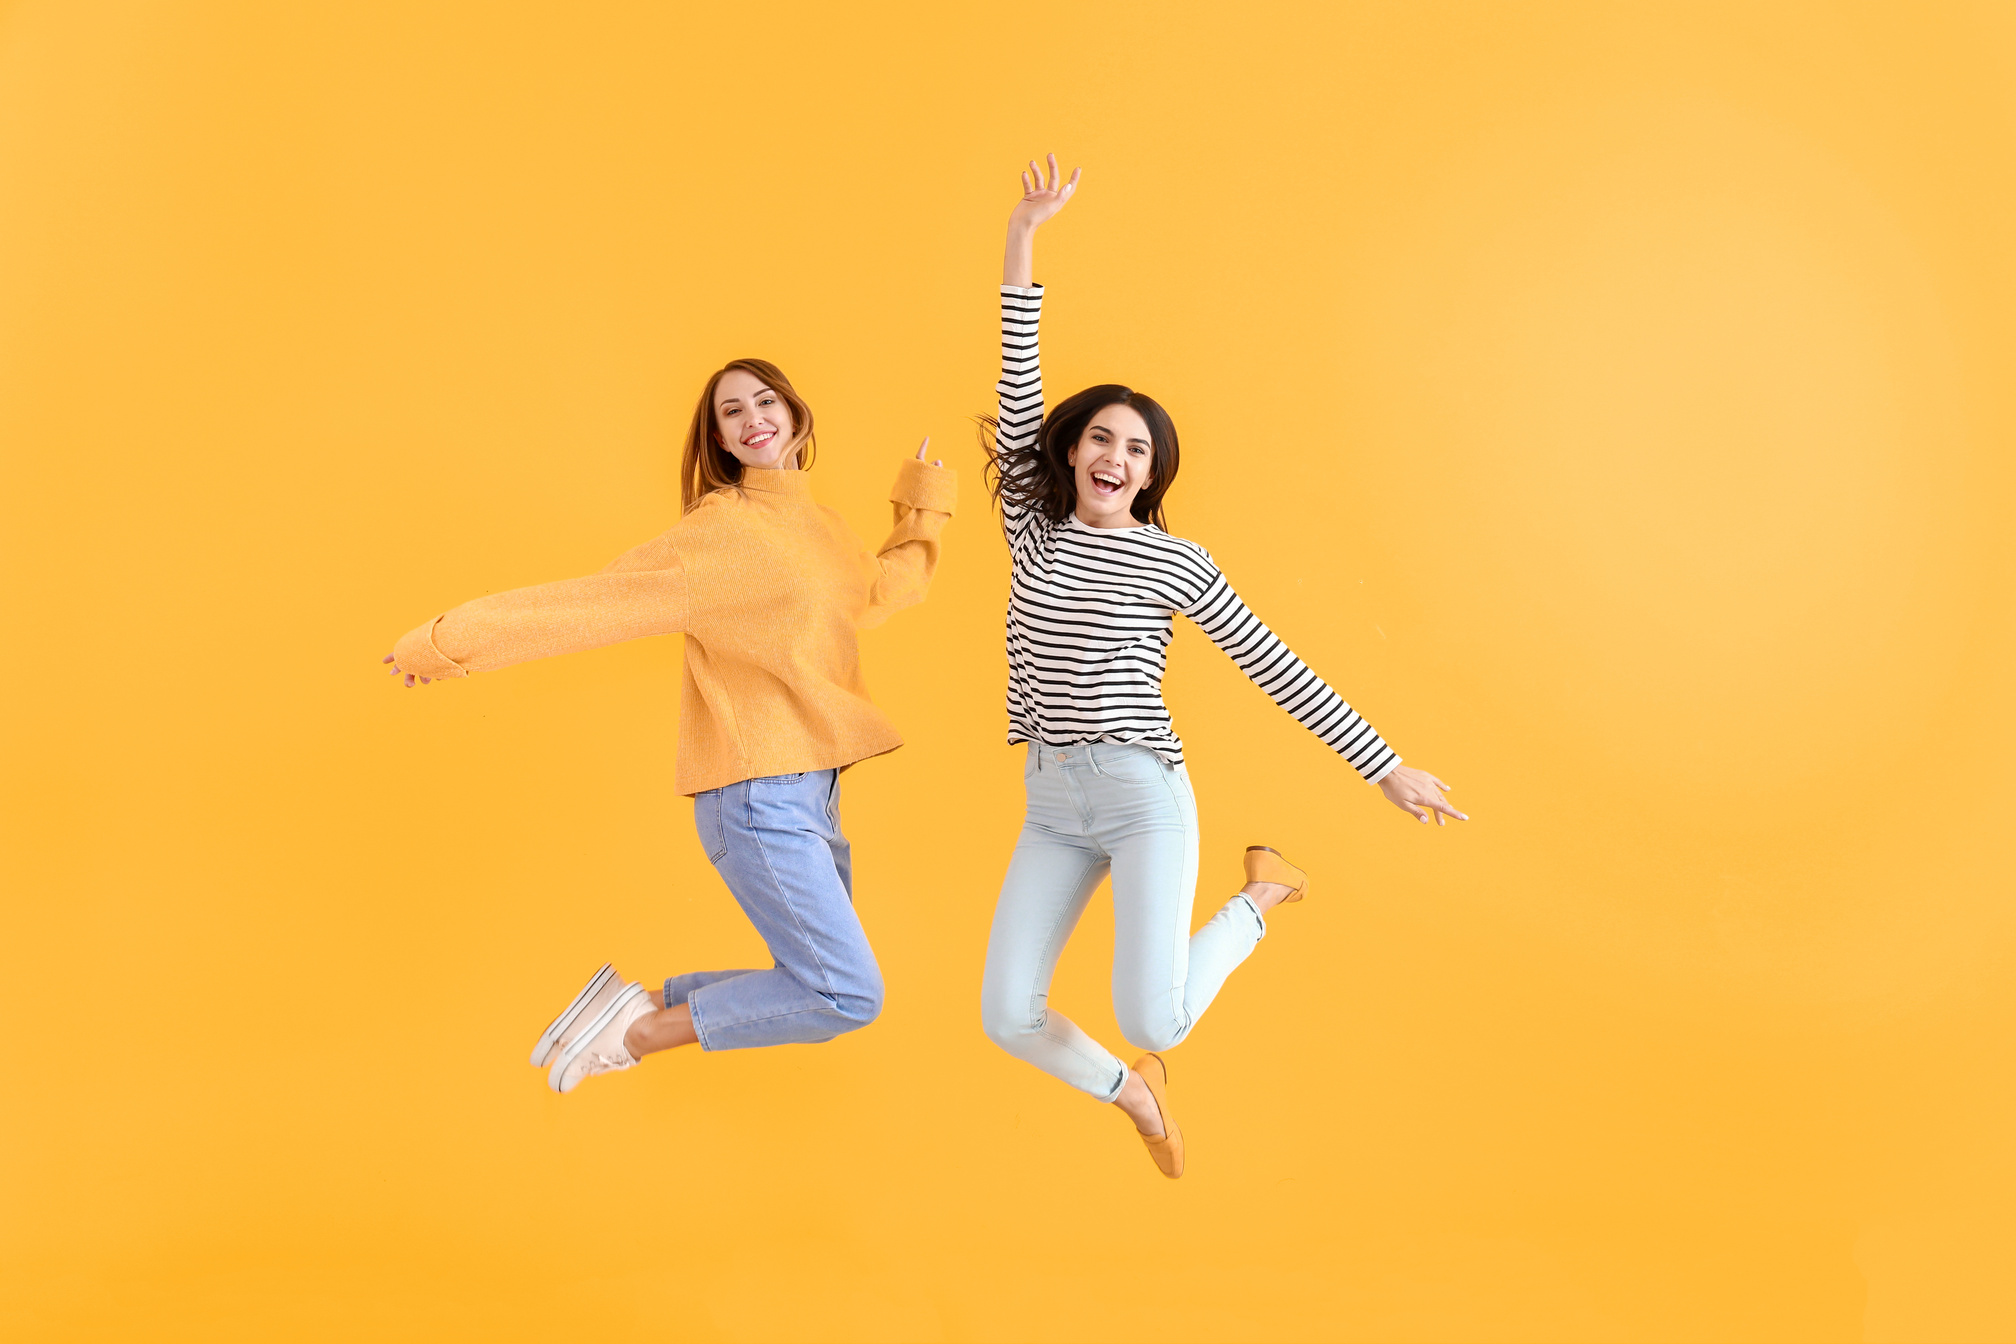 Jumping Women on Color Background